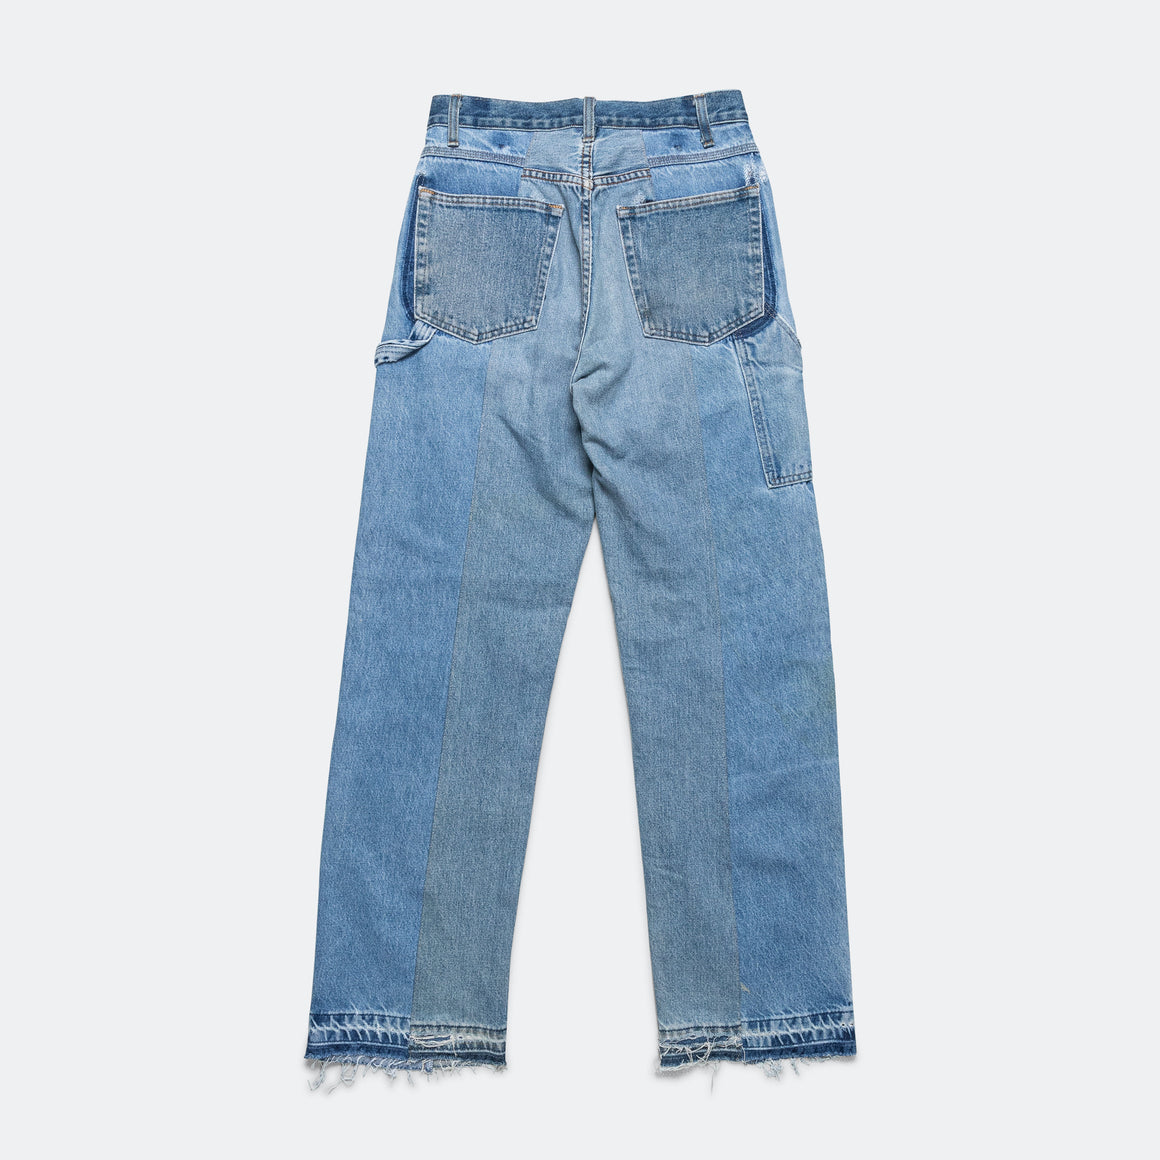 Kartik Research - Double Knee Upcycled Denim - Indigo 30" - UP THERE